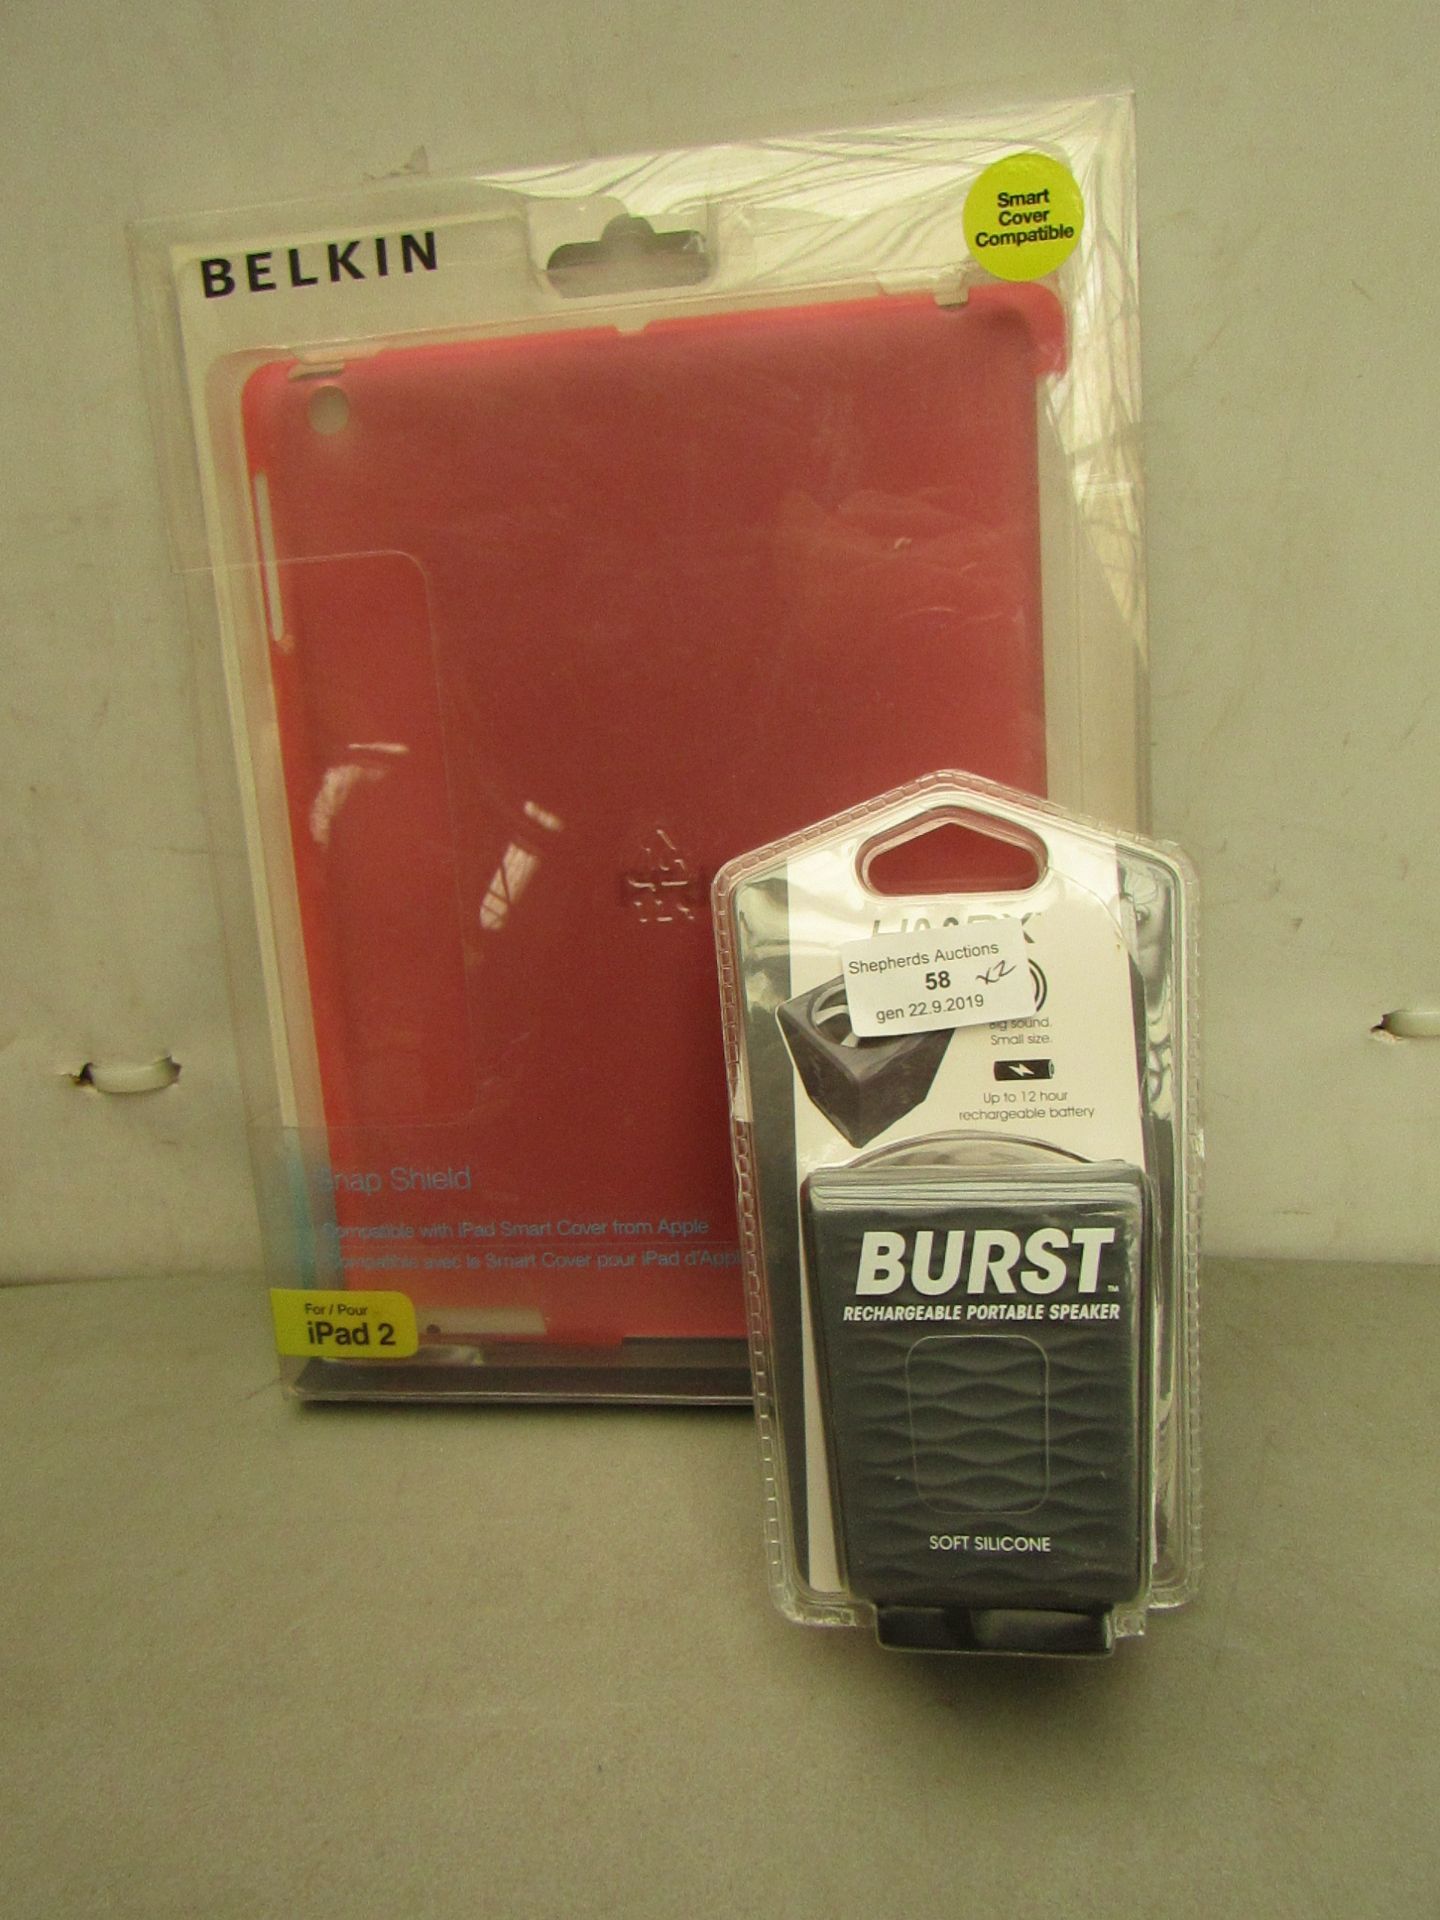 2 items being 1 x Belkin Ipad2 cover and 1 x Burst Rechargeable Portable speaker unchecked